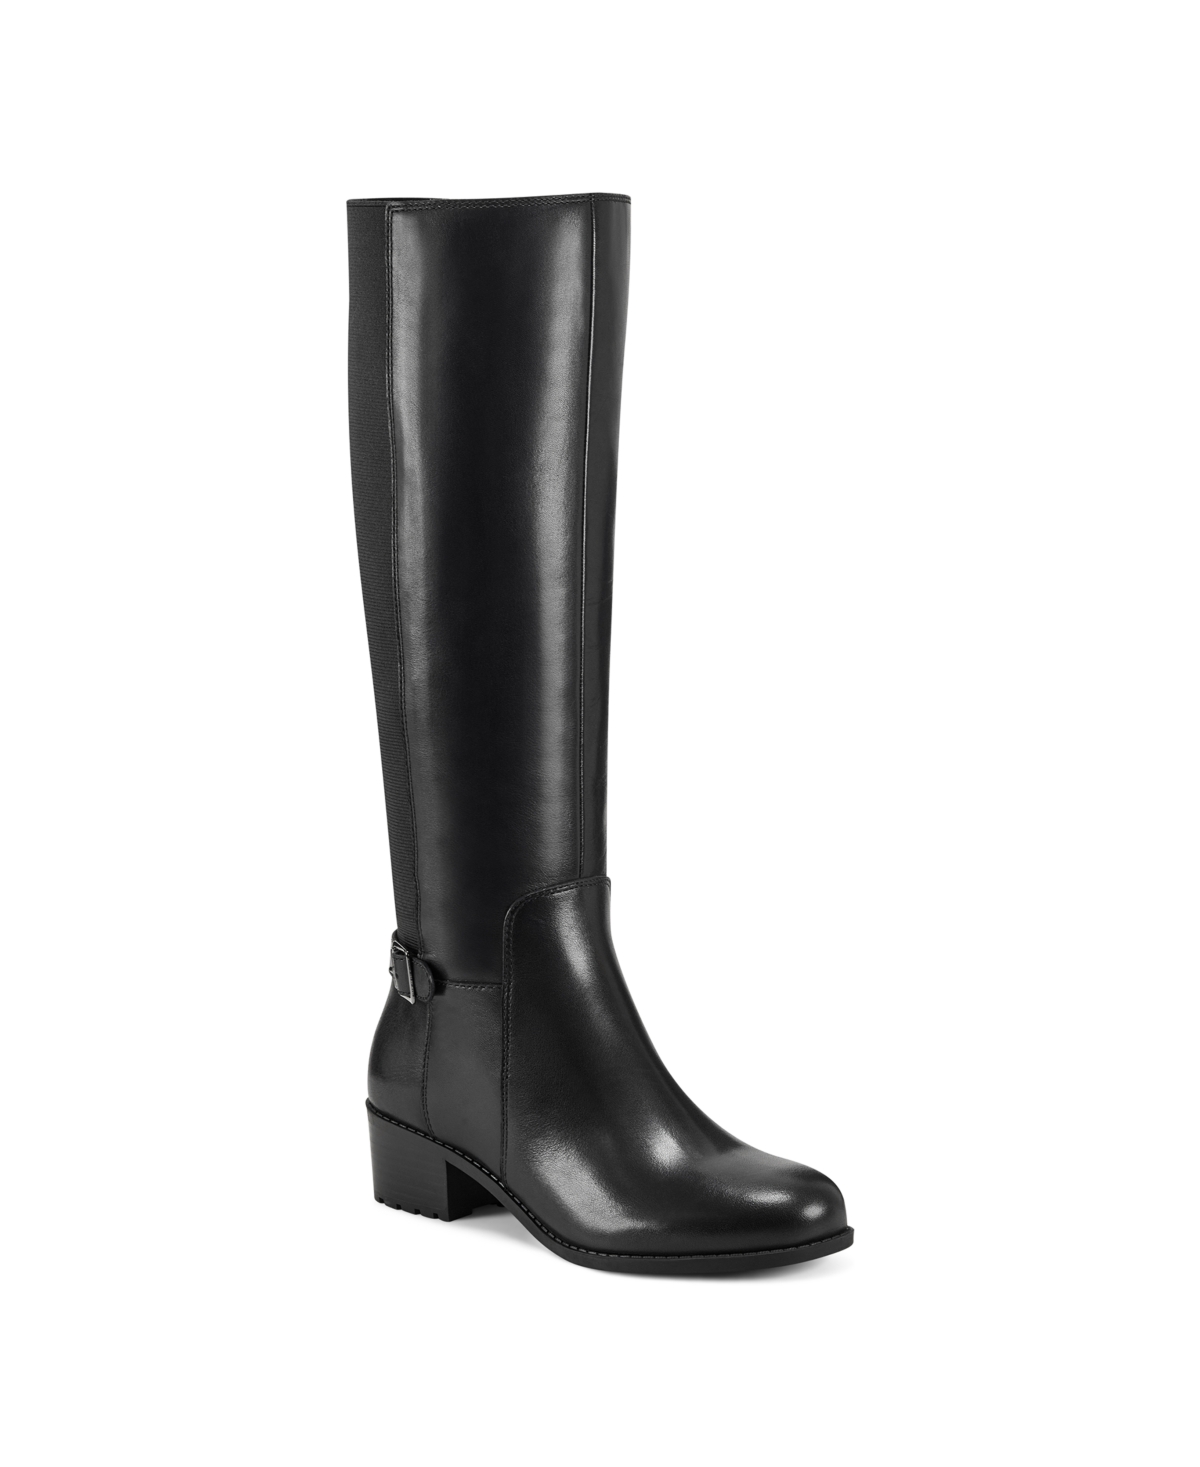 UPC 195608202380 product image for Easy Spirit Women's Chaza Tall Regular Calf Boots Women's Shoes | upcitemdb.com